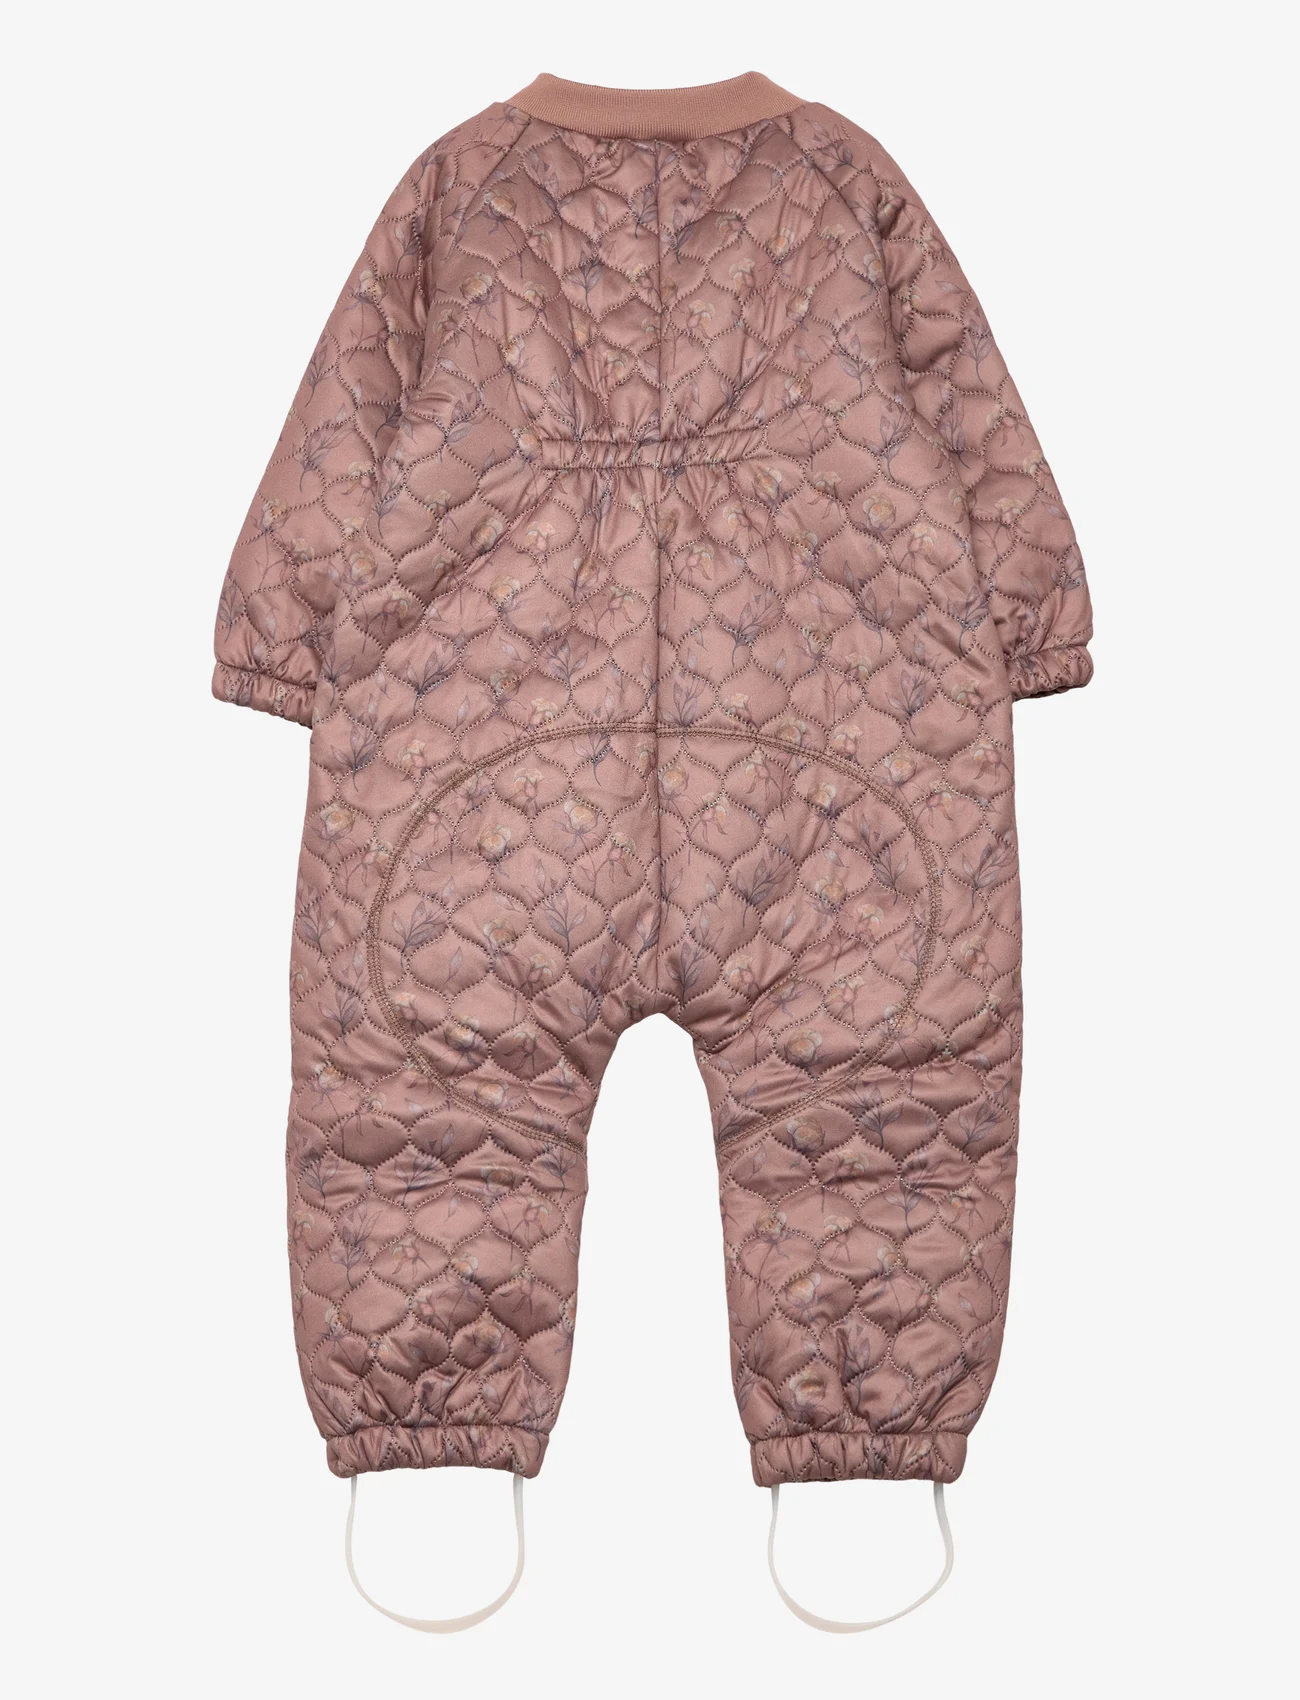 Lil'Atelier - NBFMIROSE QUILT SUIT FO LIL - thermo overalls - myristica - 1